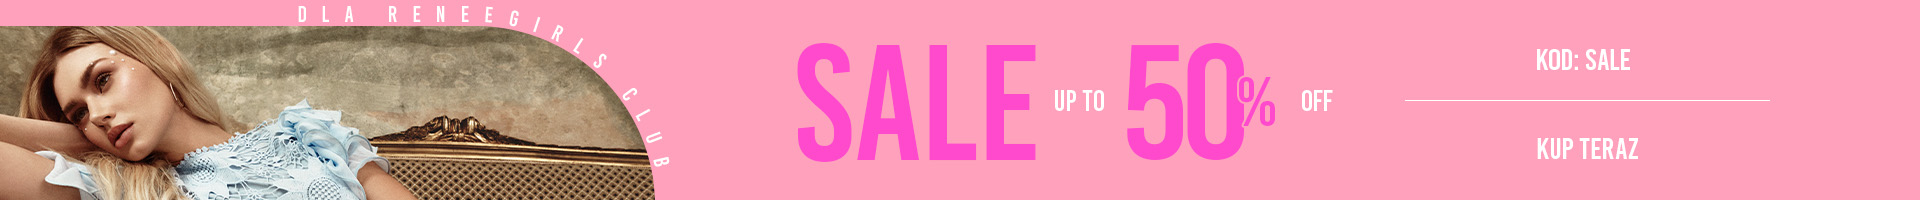 Sale up to -50%